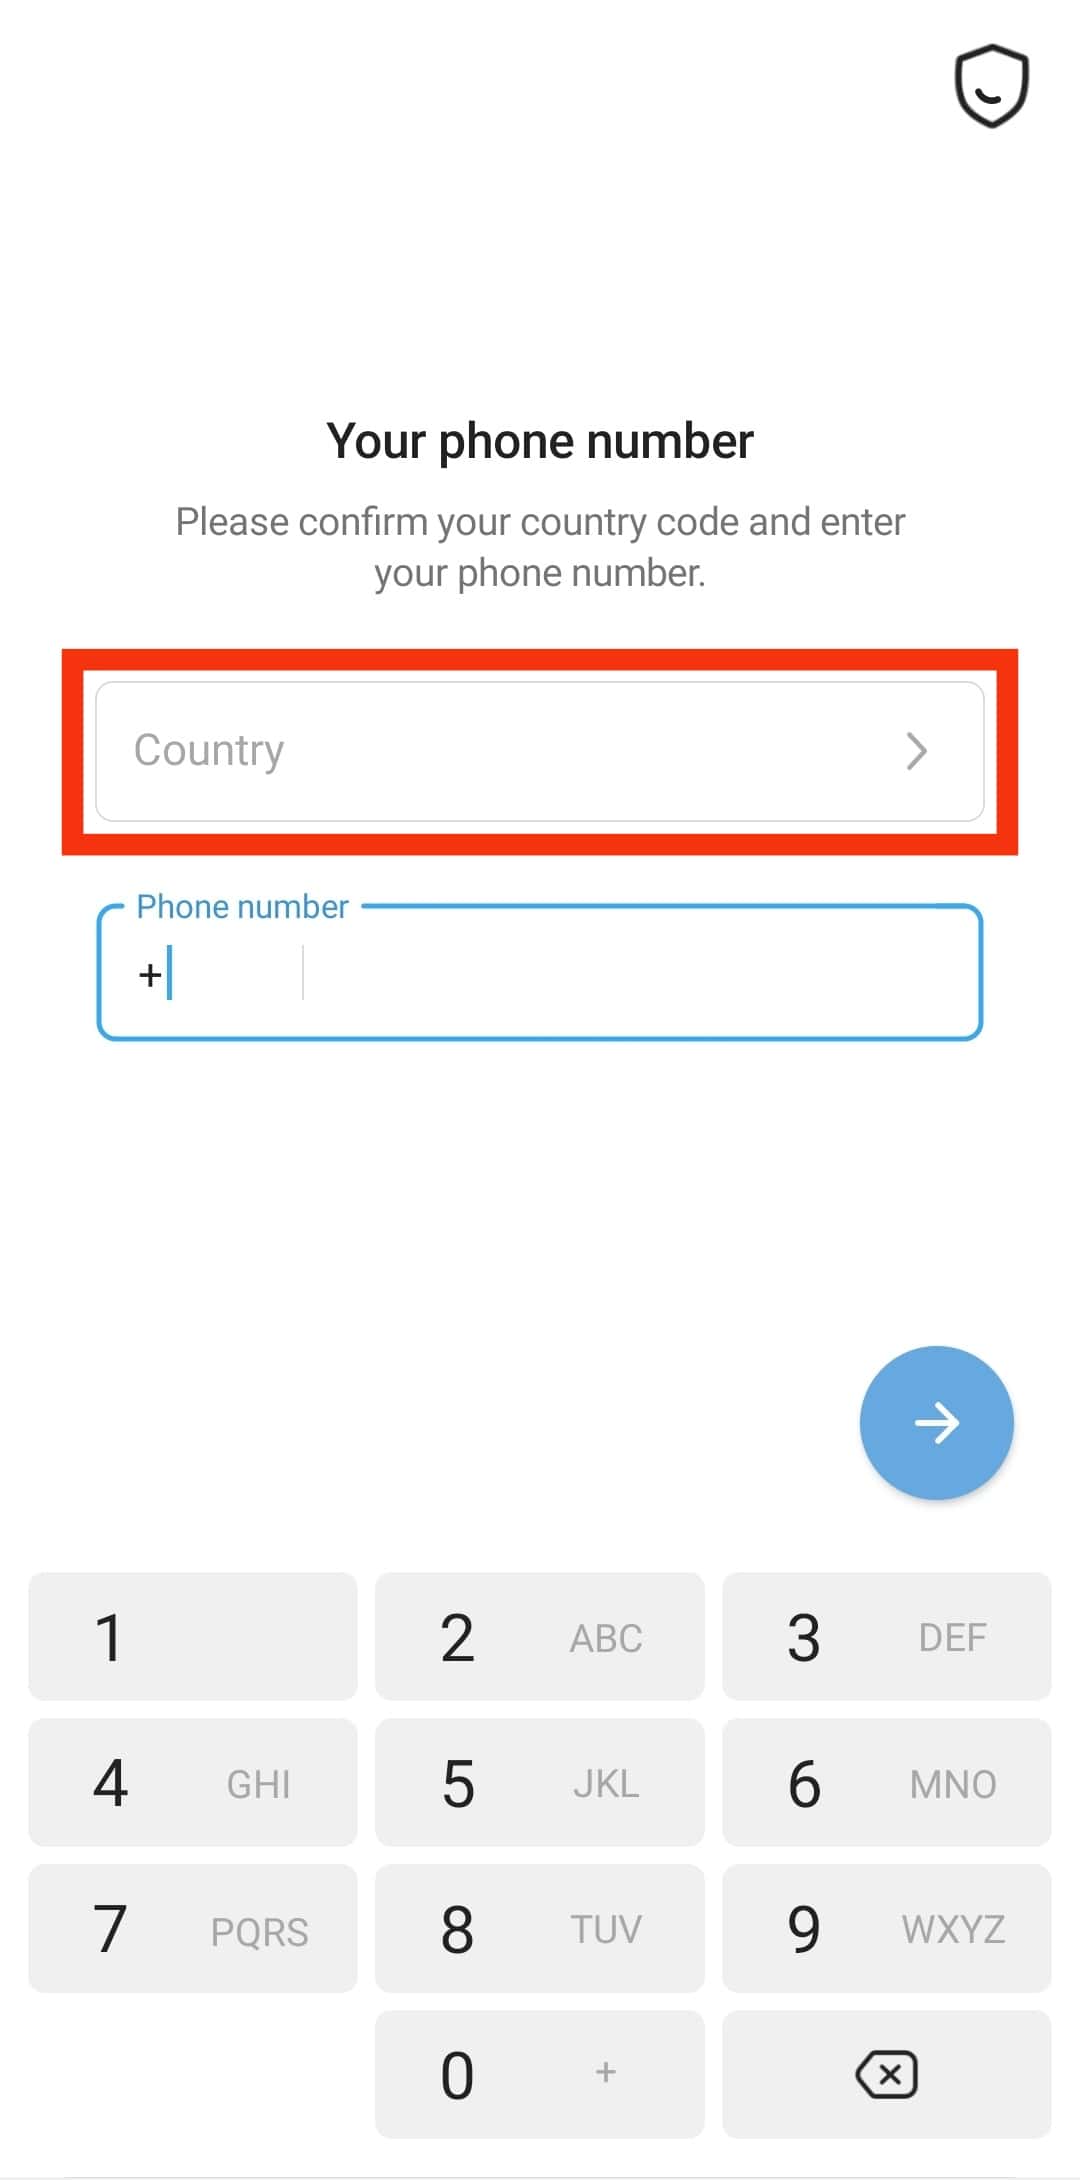 Select Your Country.